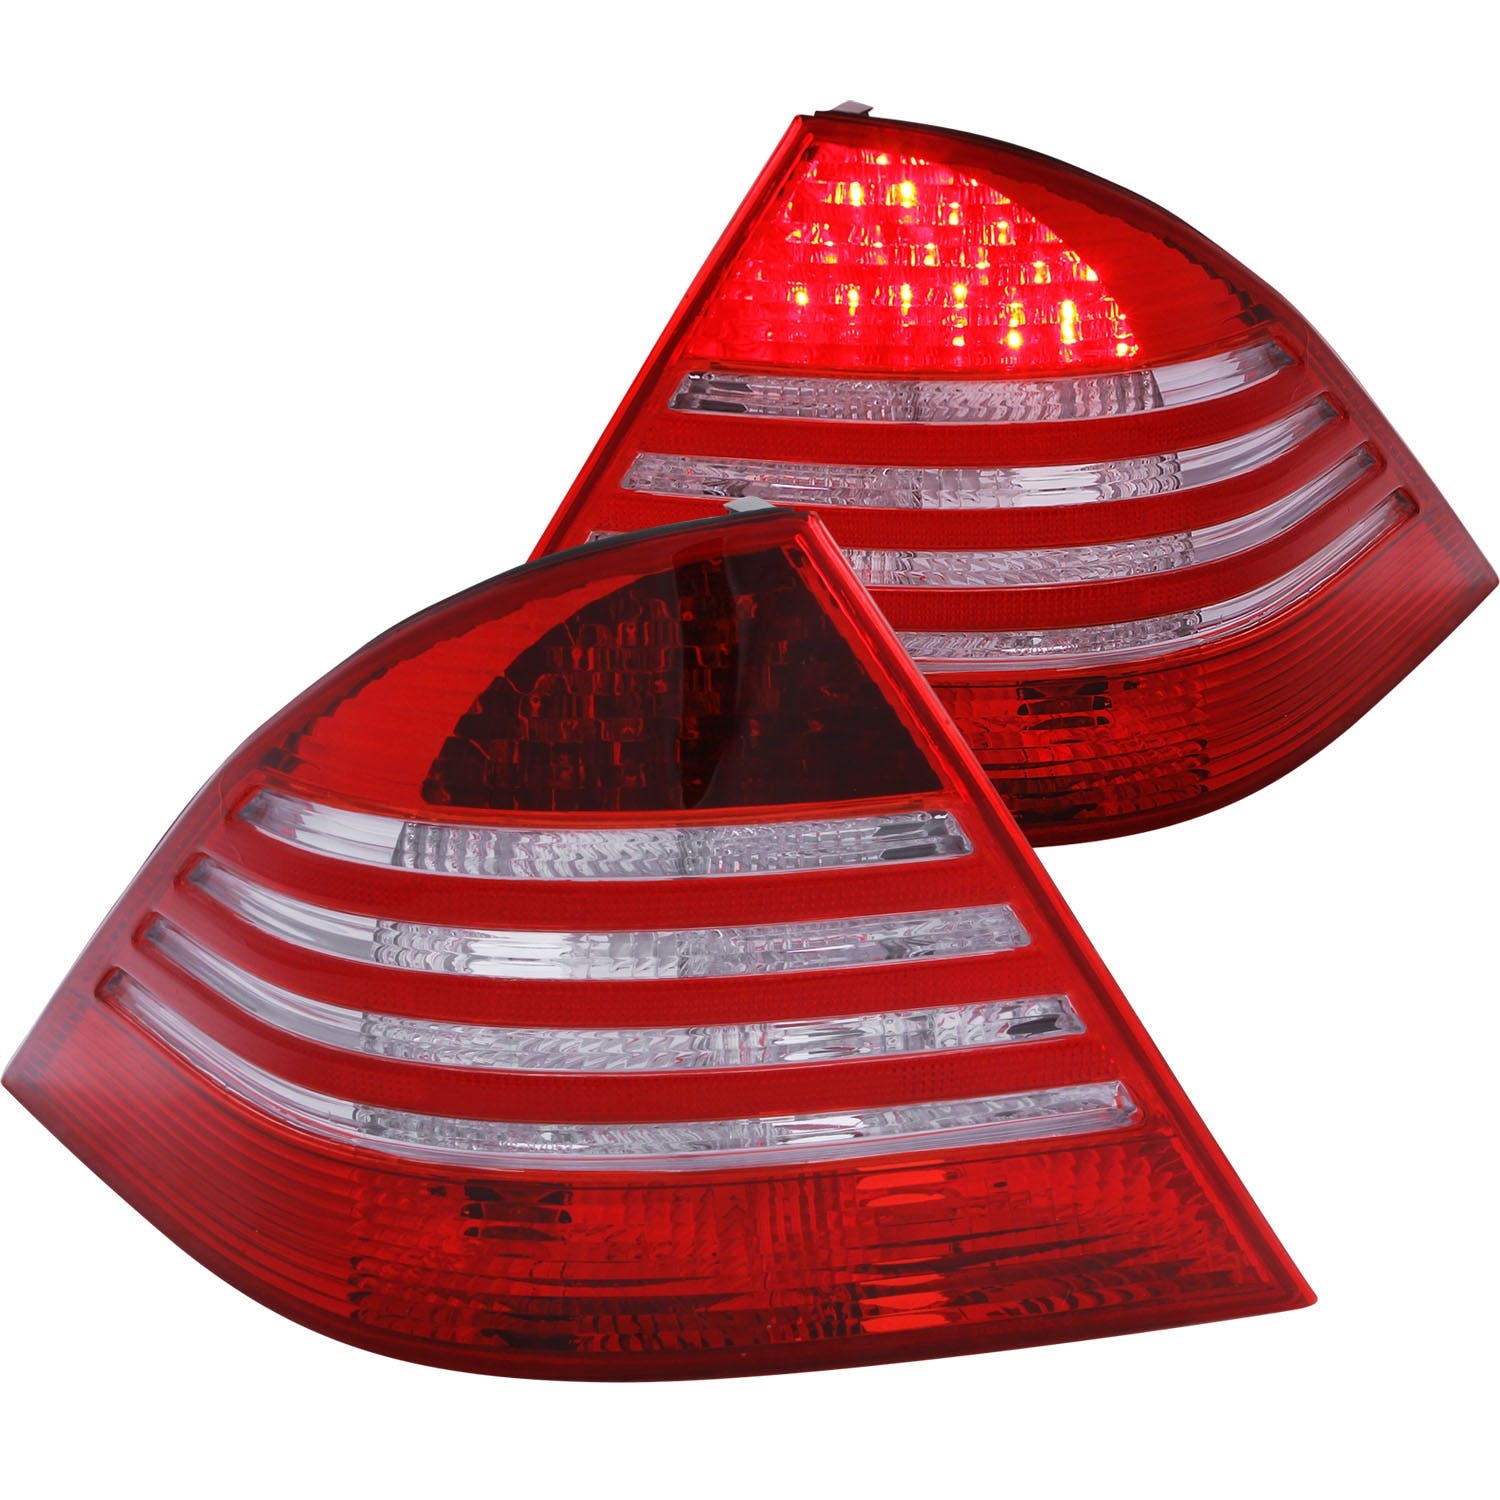 AnzoUSA 321055 LED Taillights Red/Clear